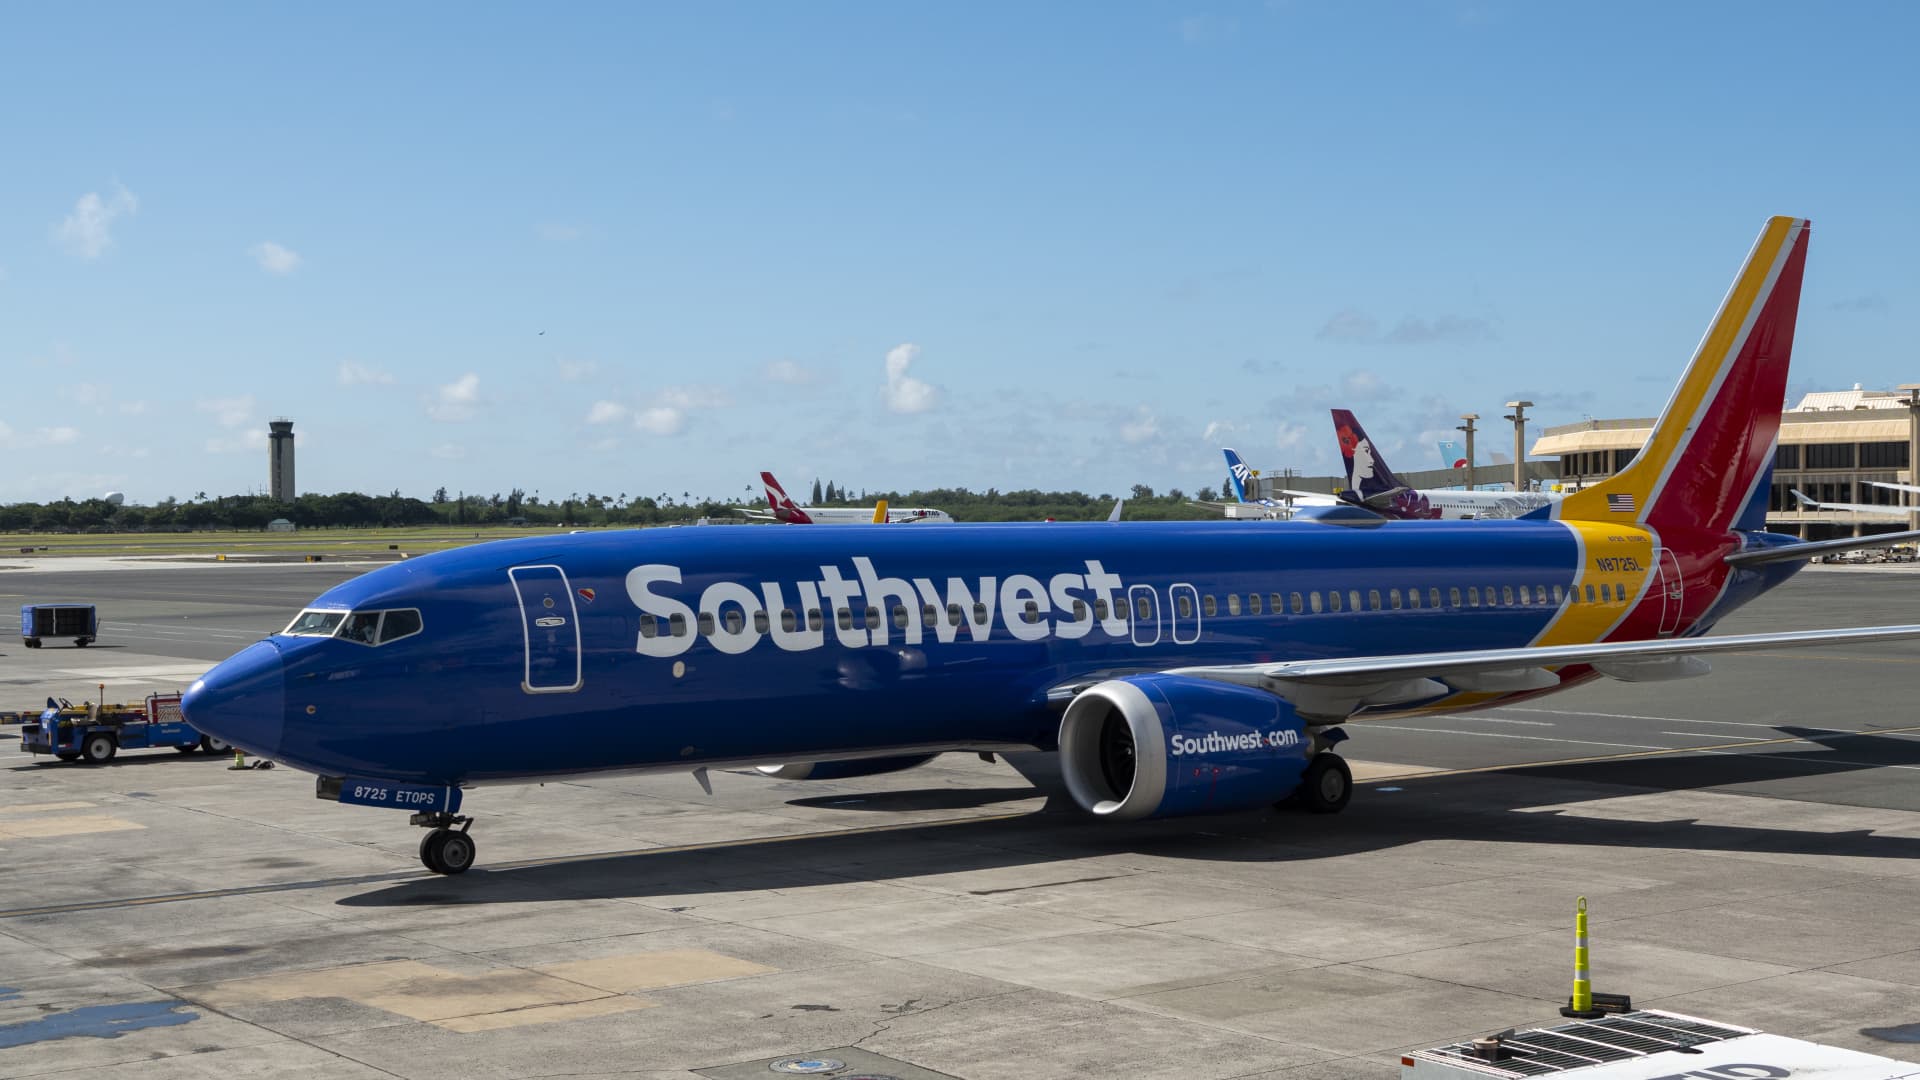 Southwest Airlines Boeing 737 lost engine cover during takeoff, FAA investigating